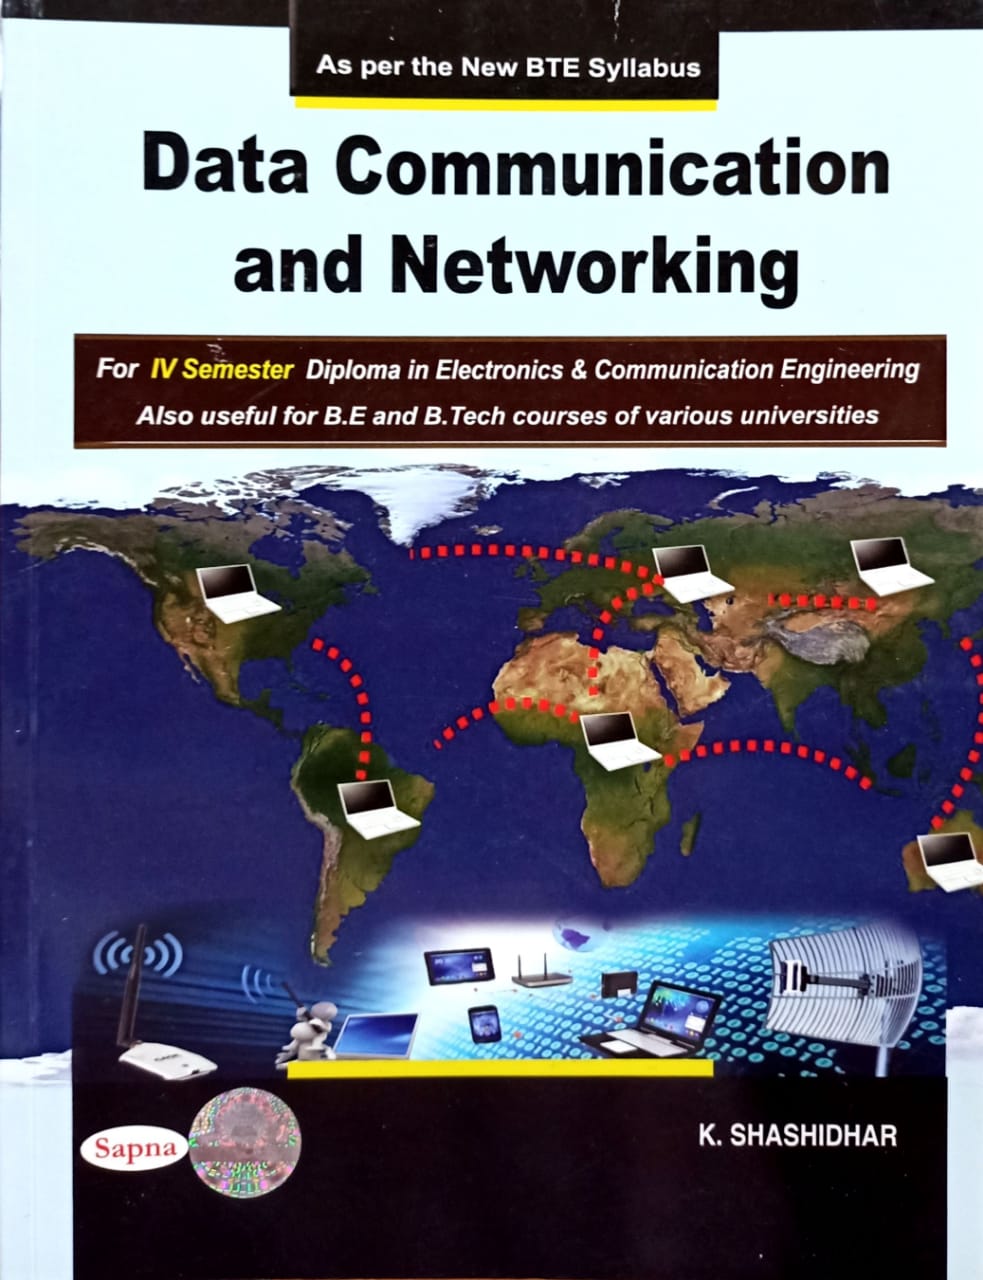 Data Communication and Networking